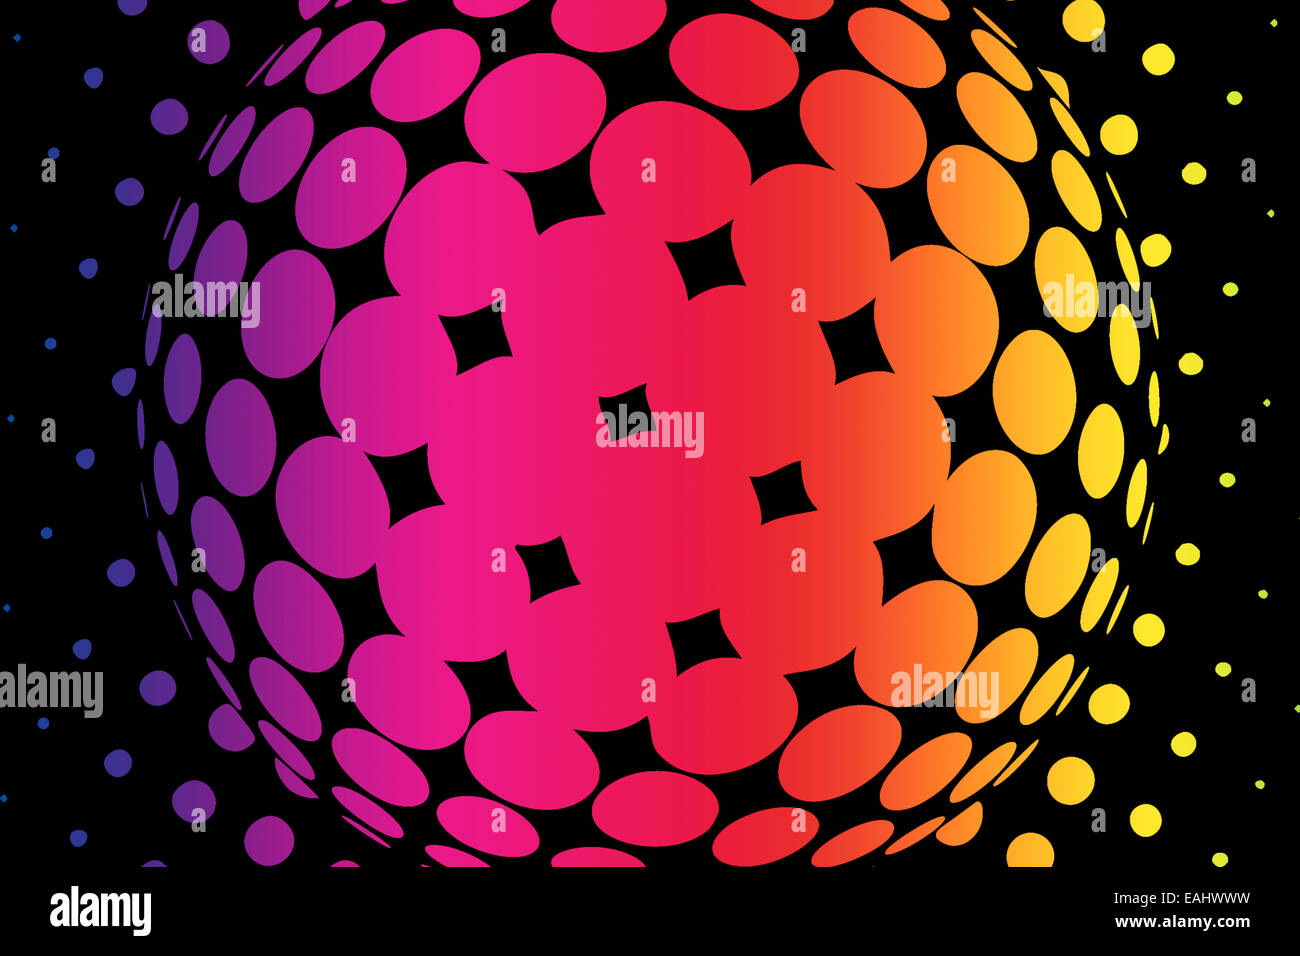 colorful dots abstract wallpaper texturized graphic background Stock Photo